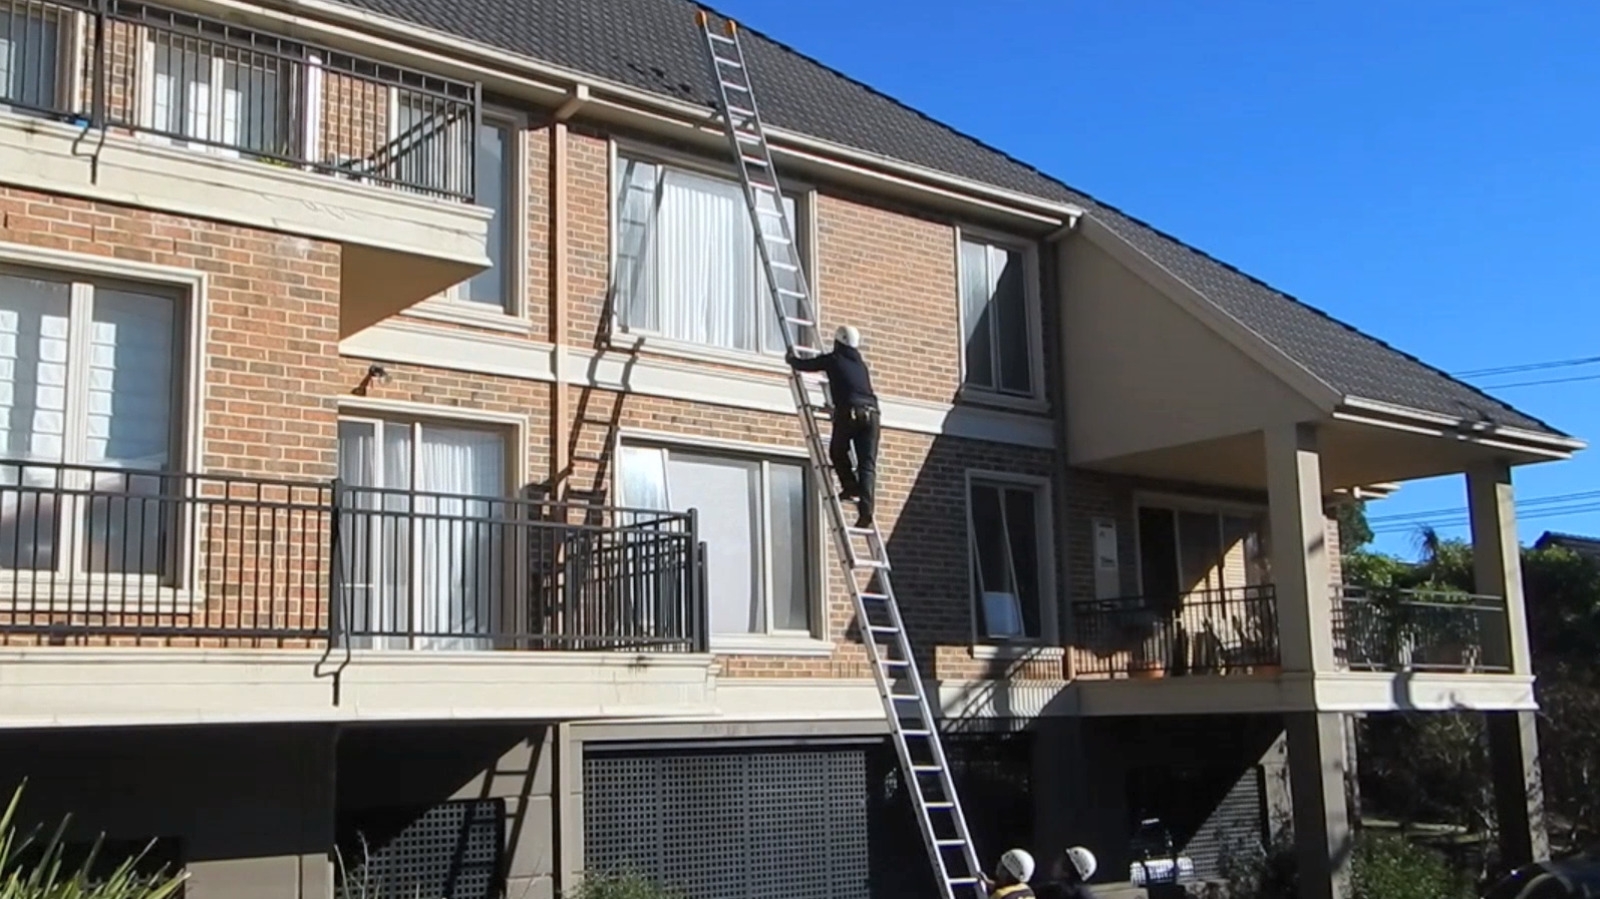 Ladders for gutter cleaning